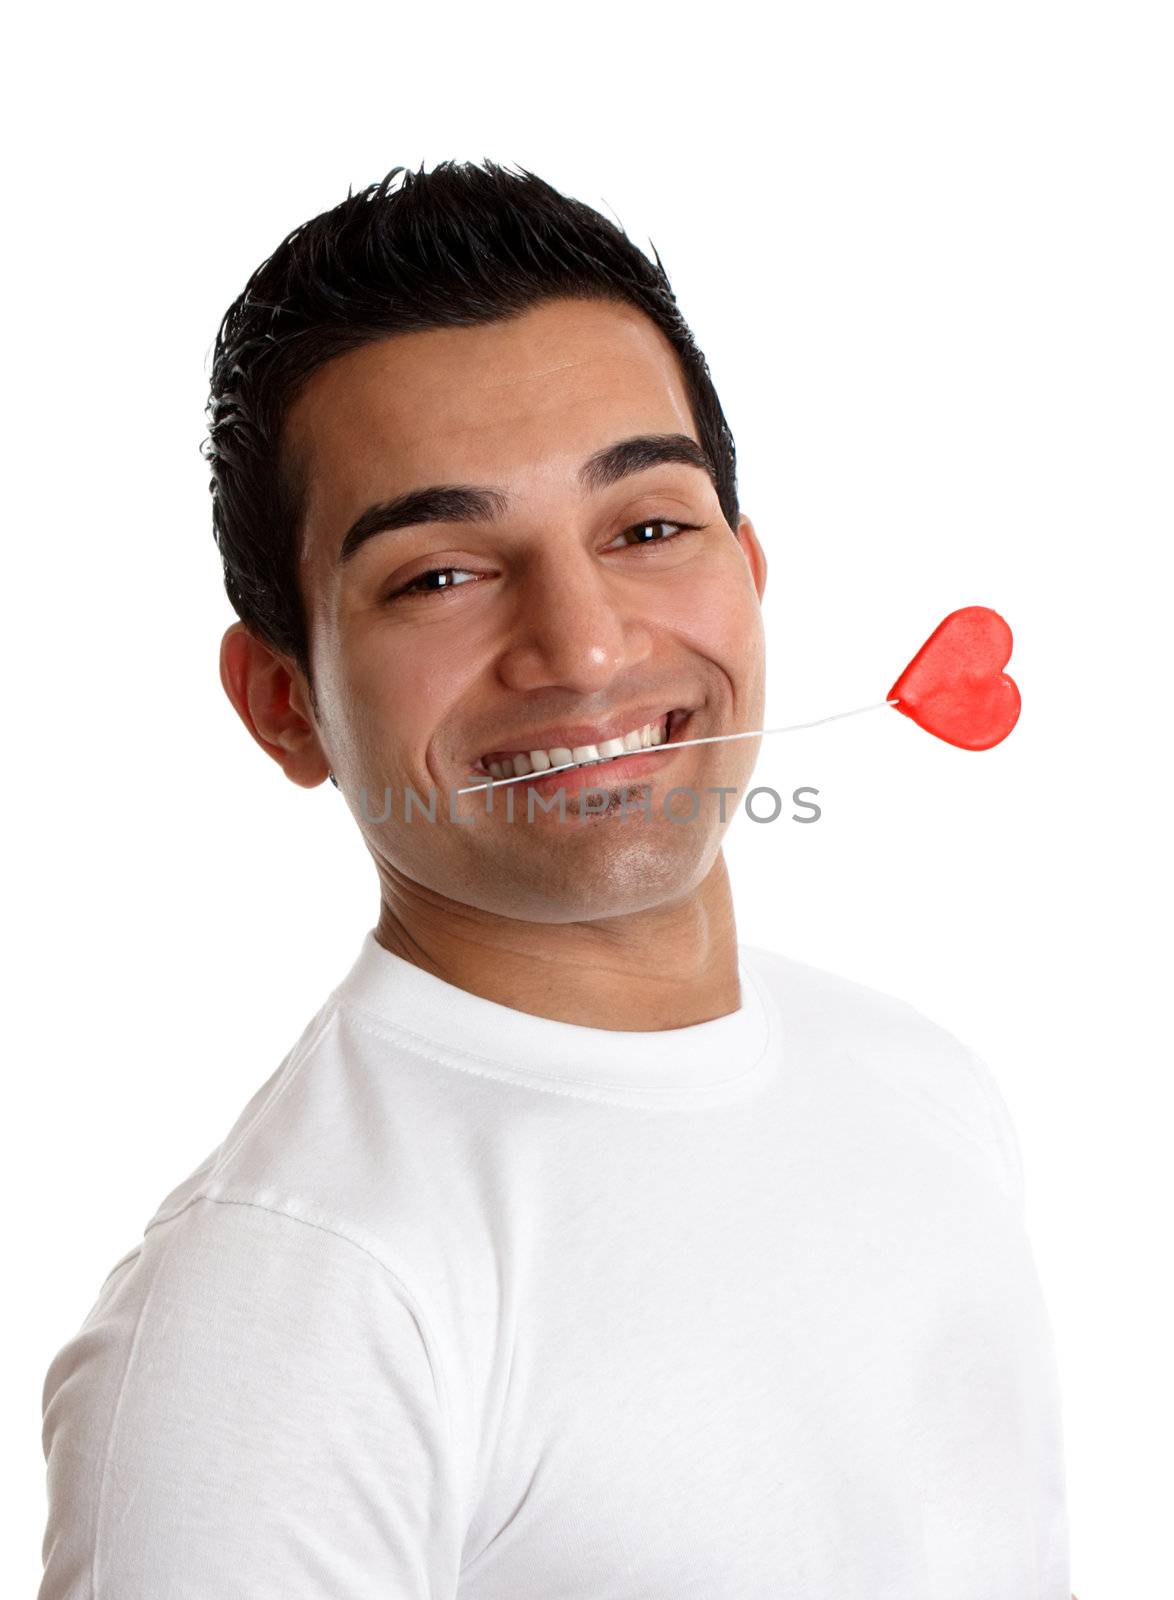 A romantic man holds a red love heart on a stick between his teeth